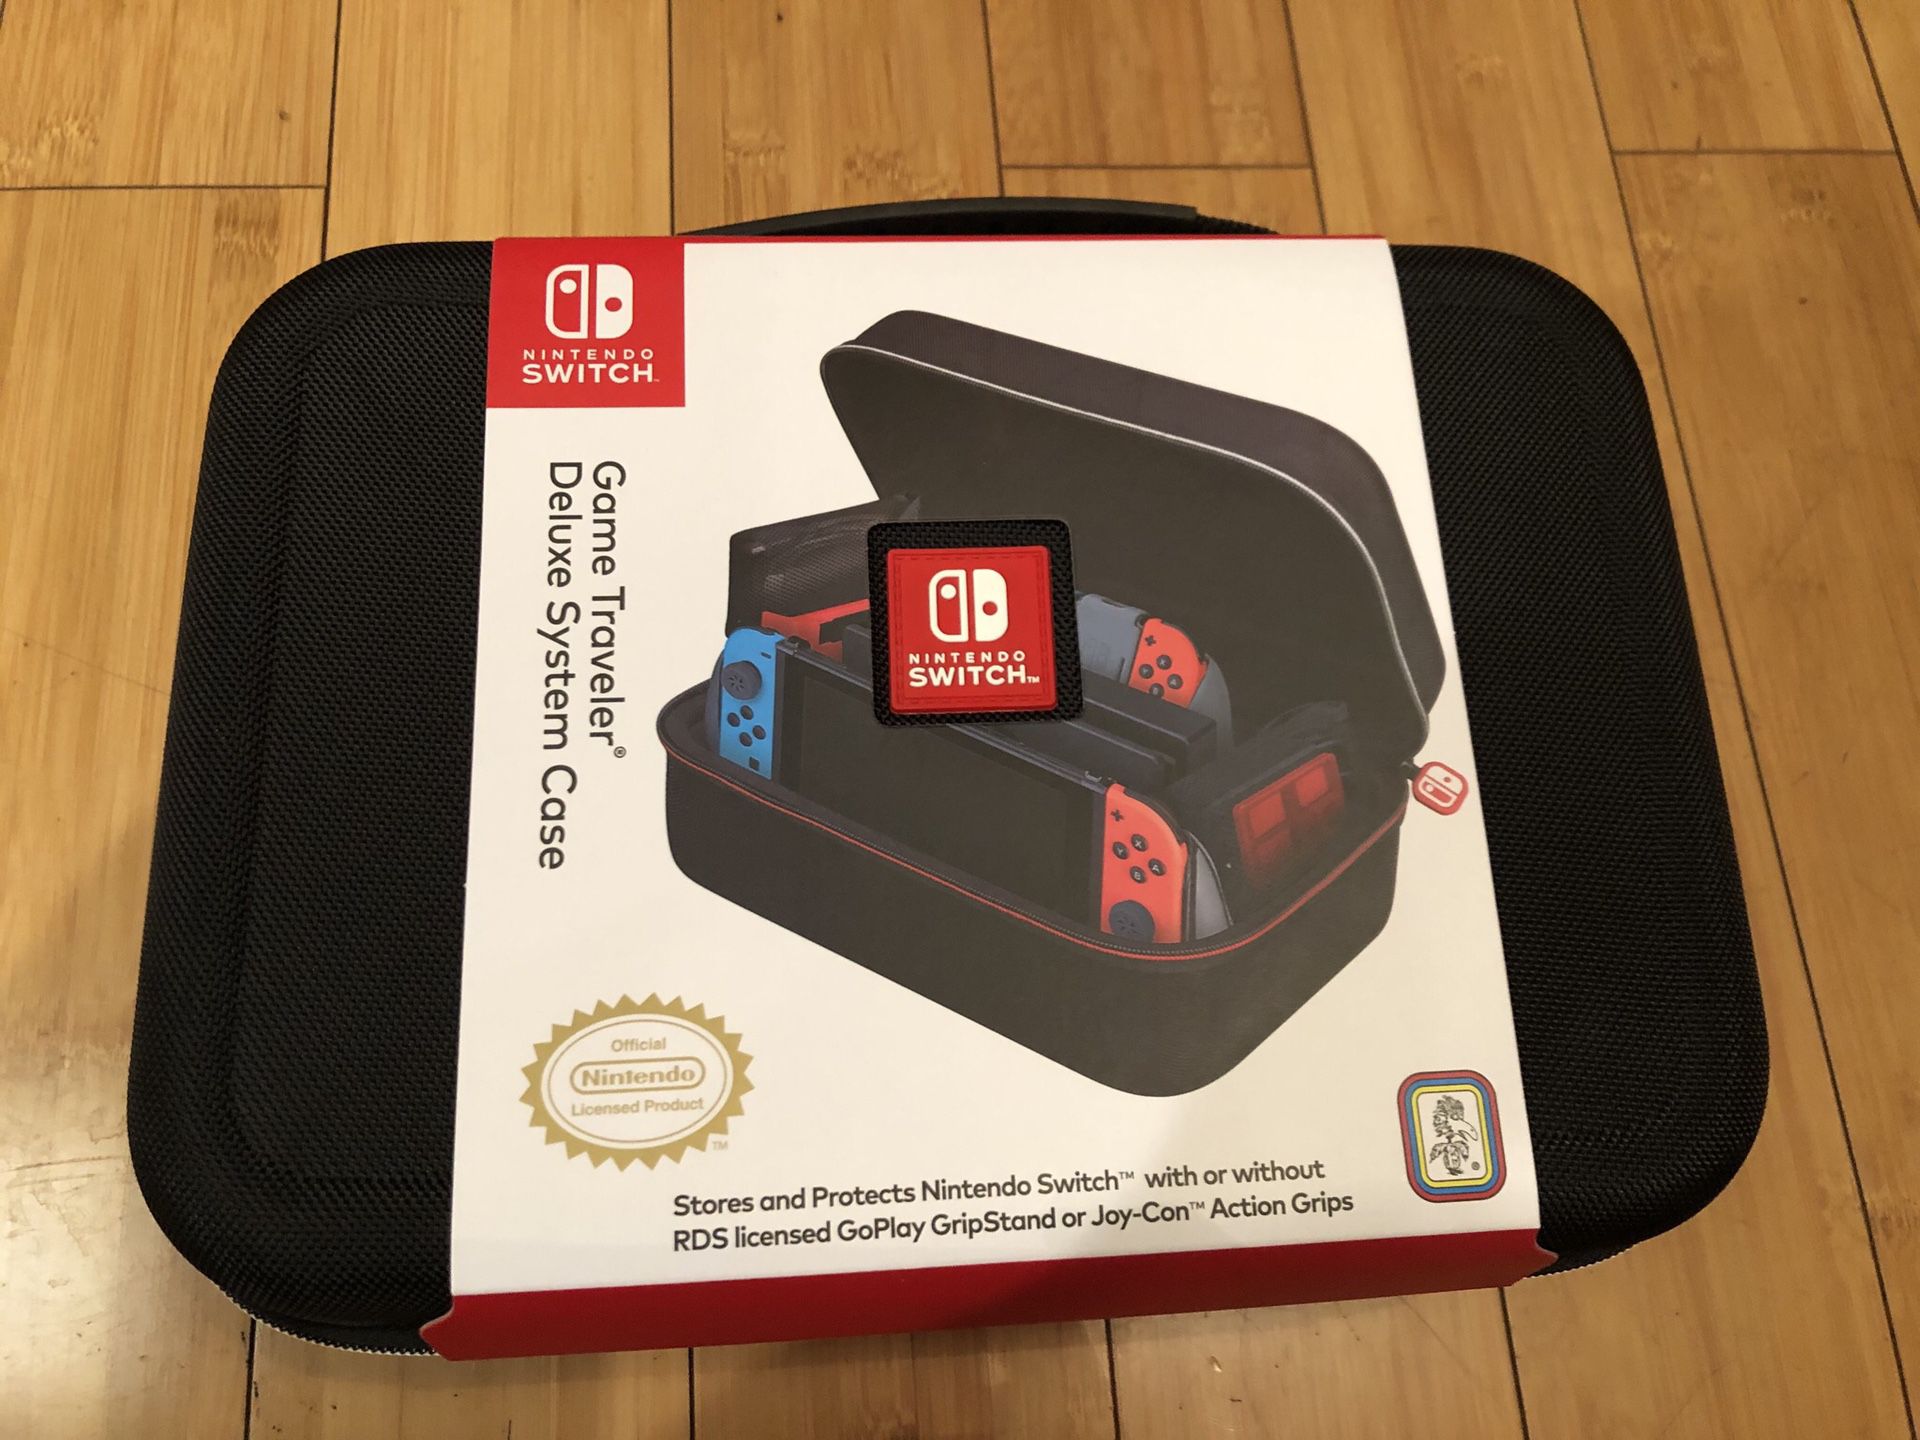 Brand new official Nintendo Deluxe travel system case